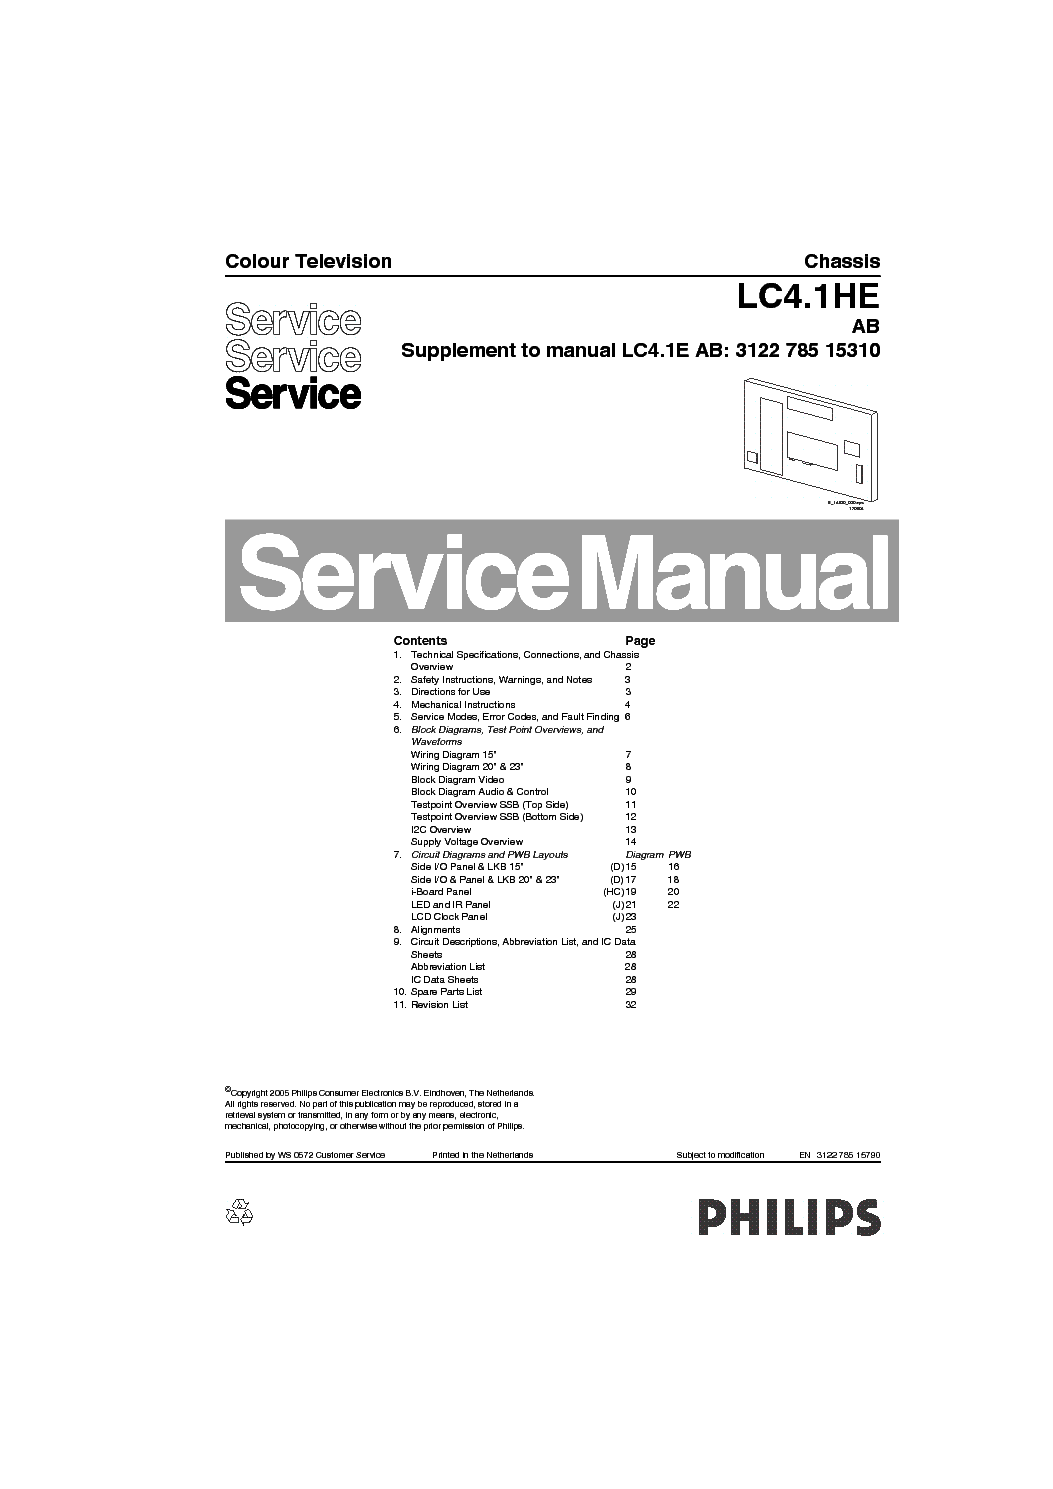 PHILIPS 20HF5474 24HF5474 CHASSIS LC4.1HE-AB service manual (1st page)